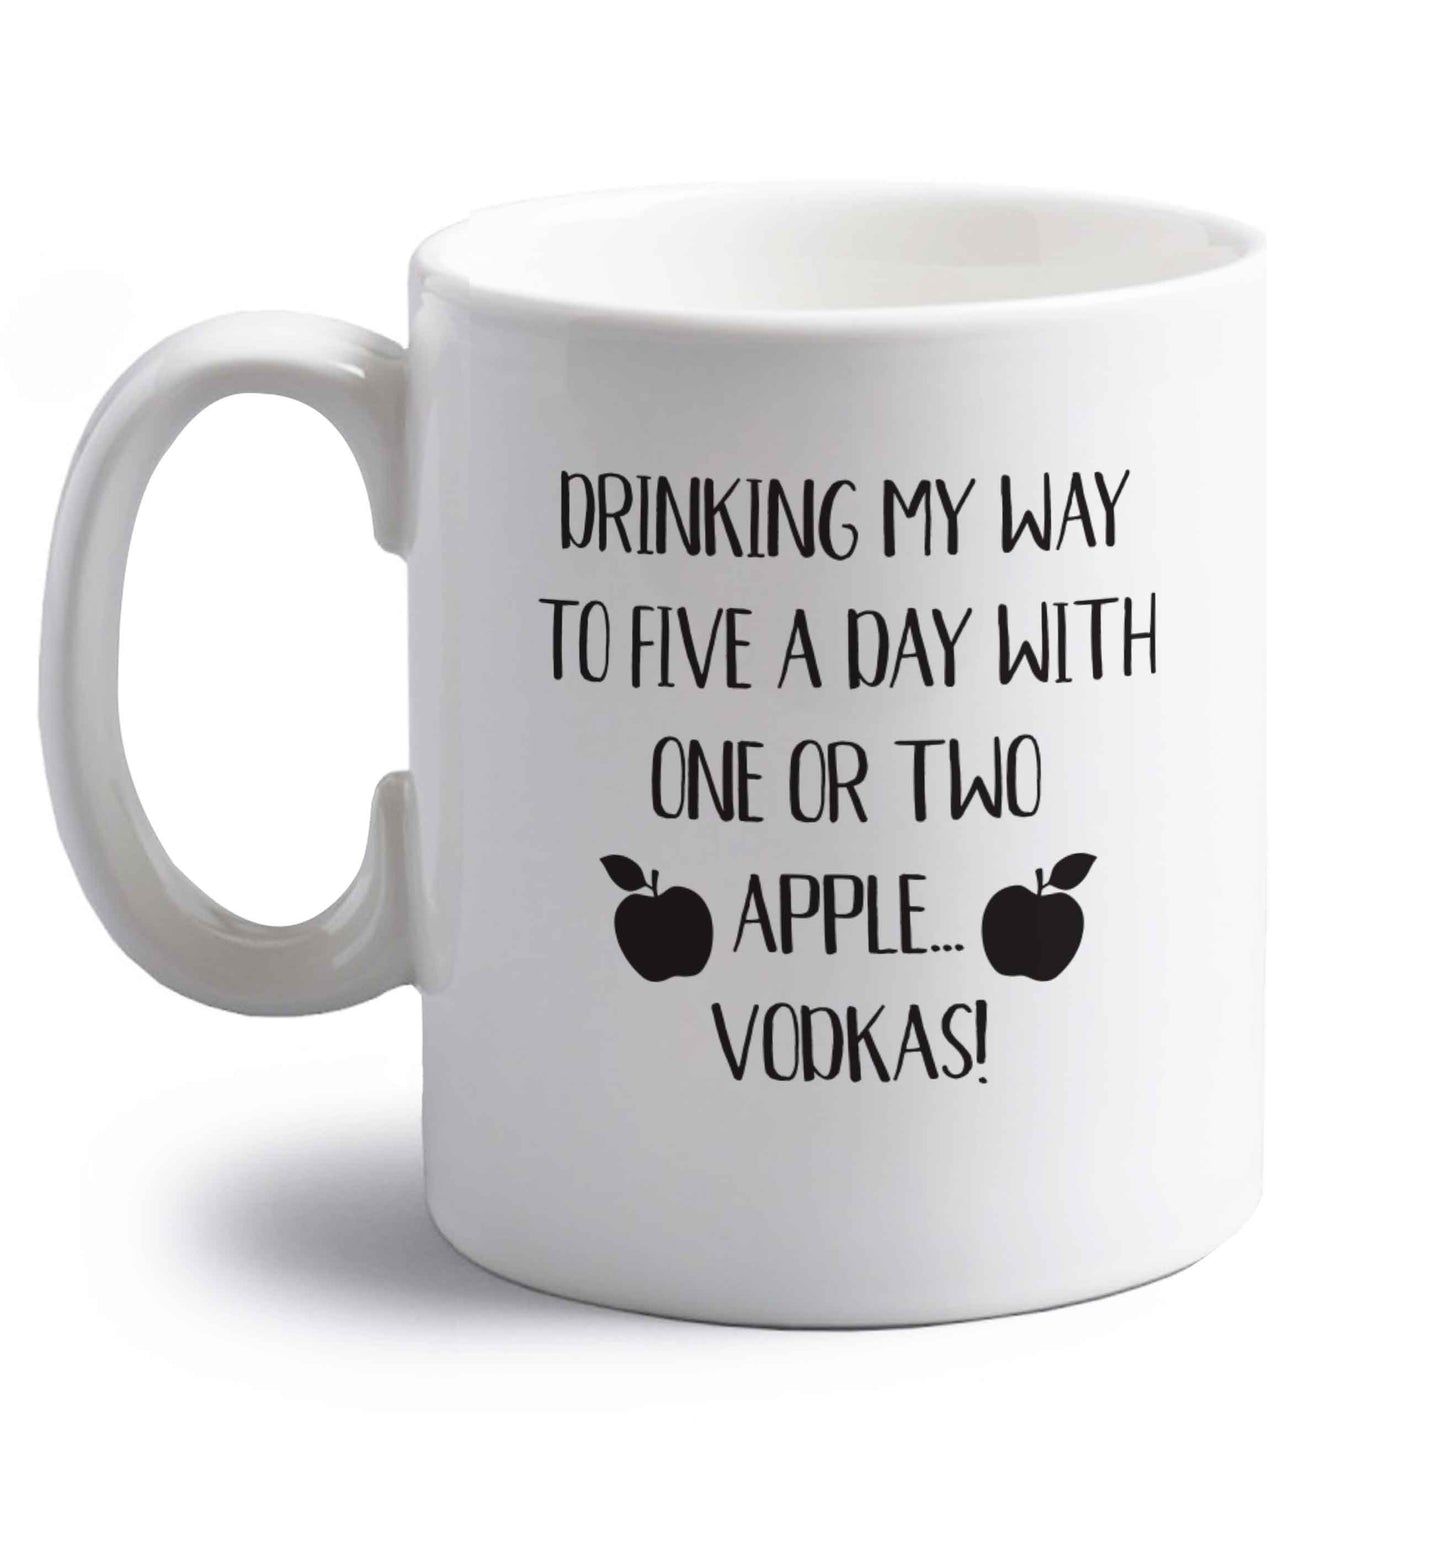 Drinking my way to five a day with one or two apple vodkas right handed white ceramic mug 